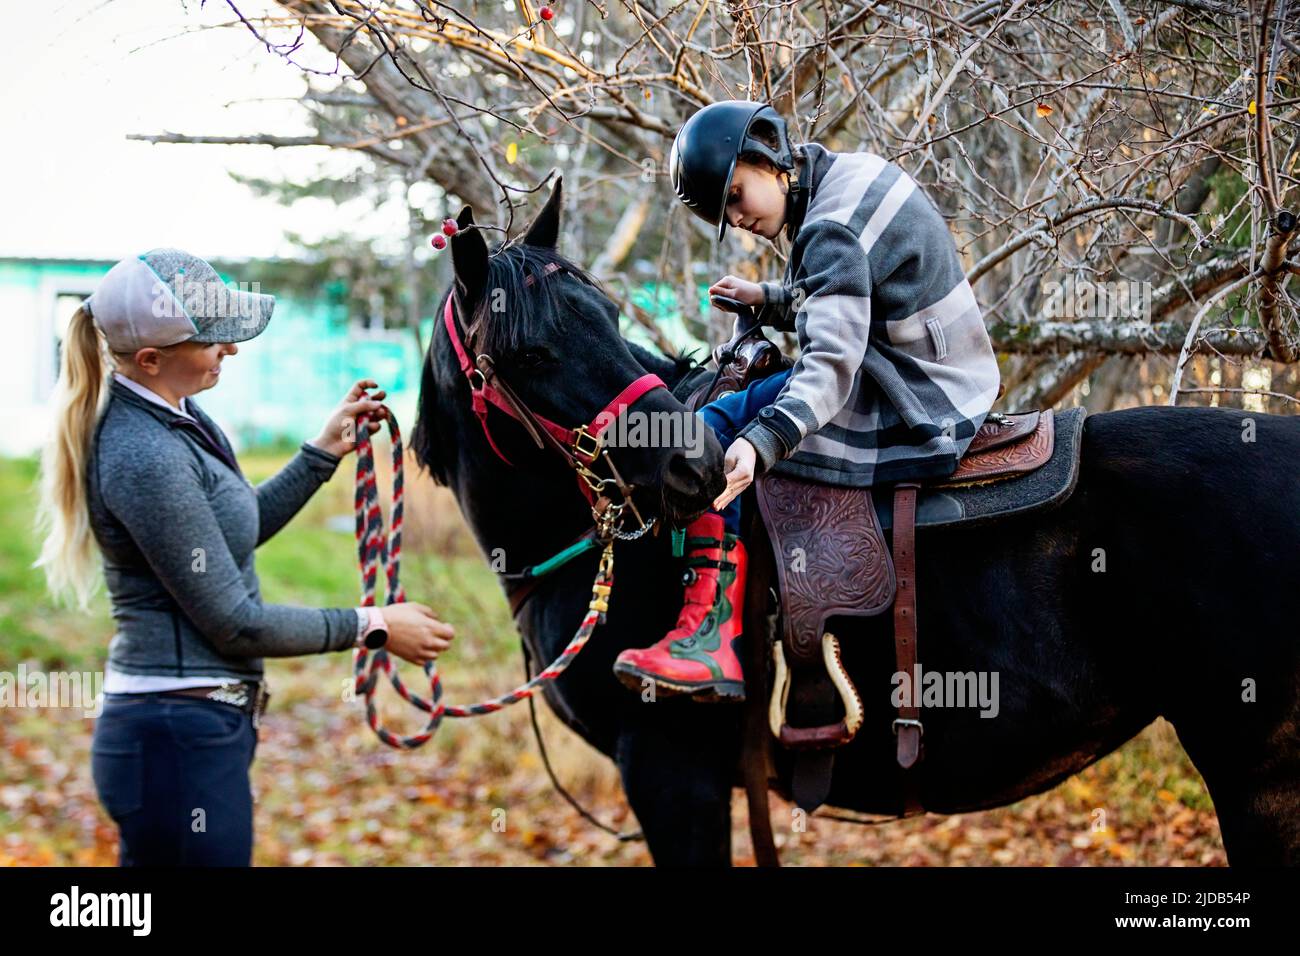 A young girl with Cerebral Palsy and her trainer stop to get a treat of apples for a horse during a Hippotherapy session; Westlock, Alberta, Canada Stock Photo